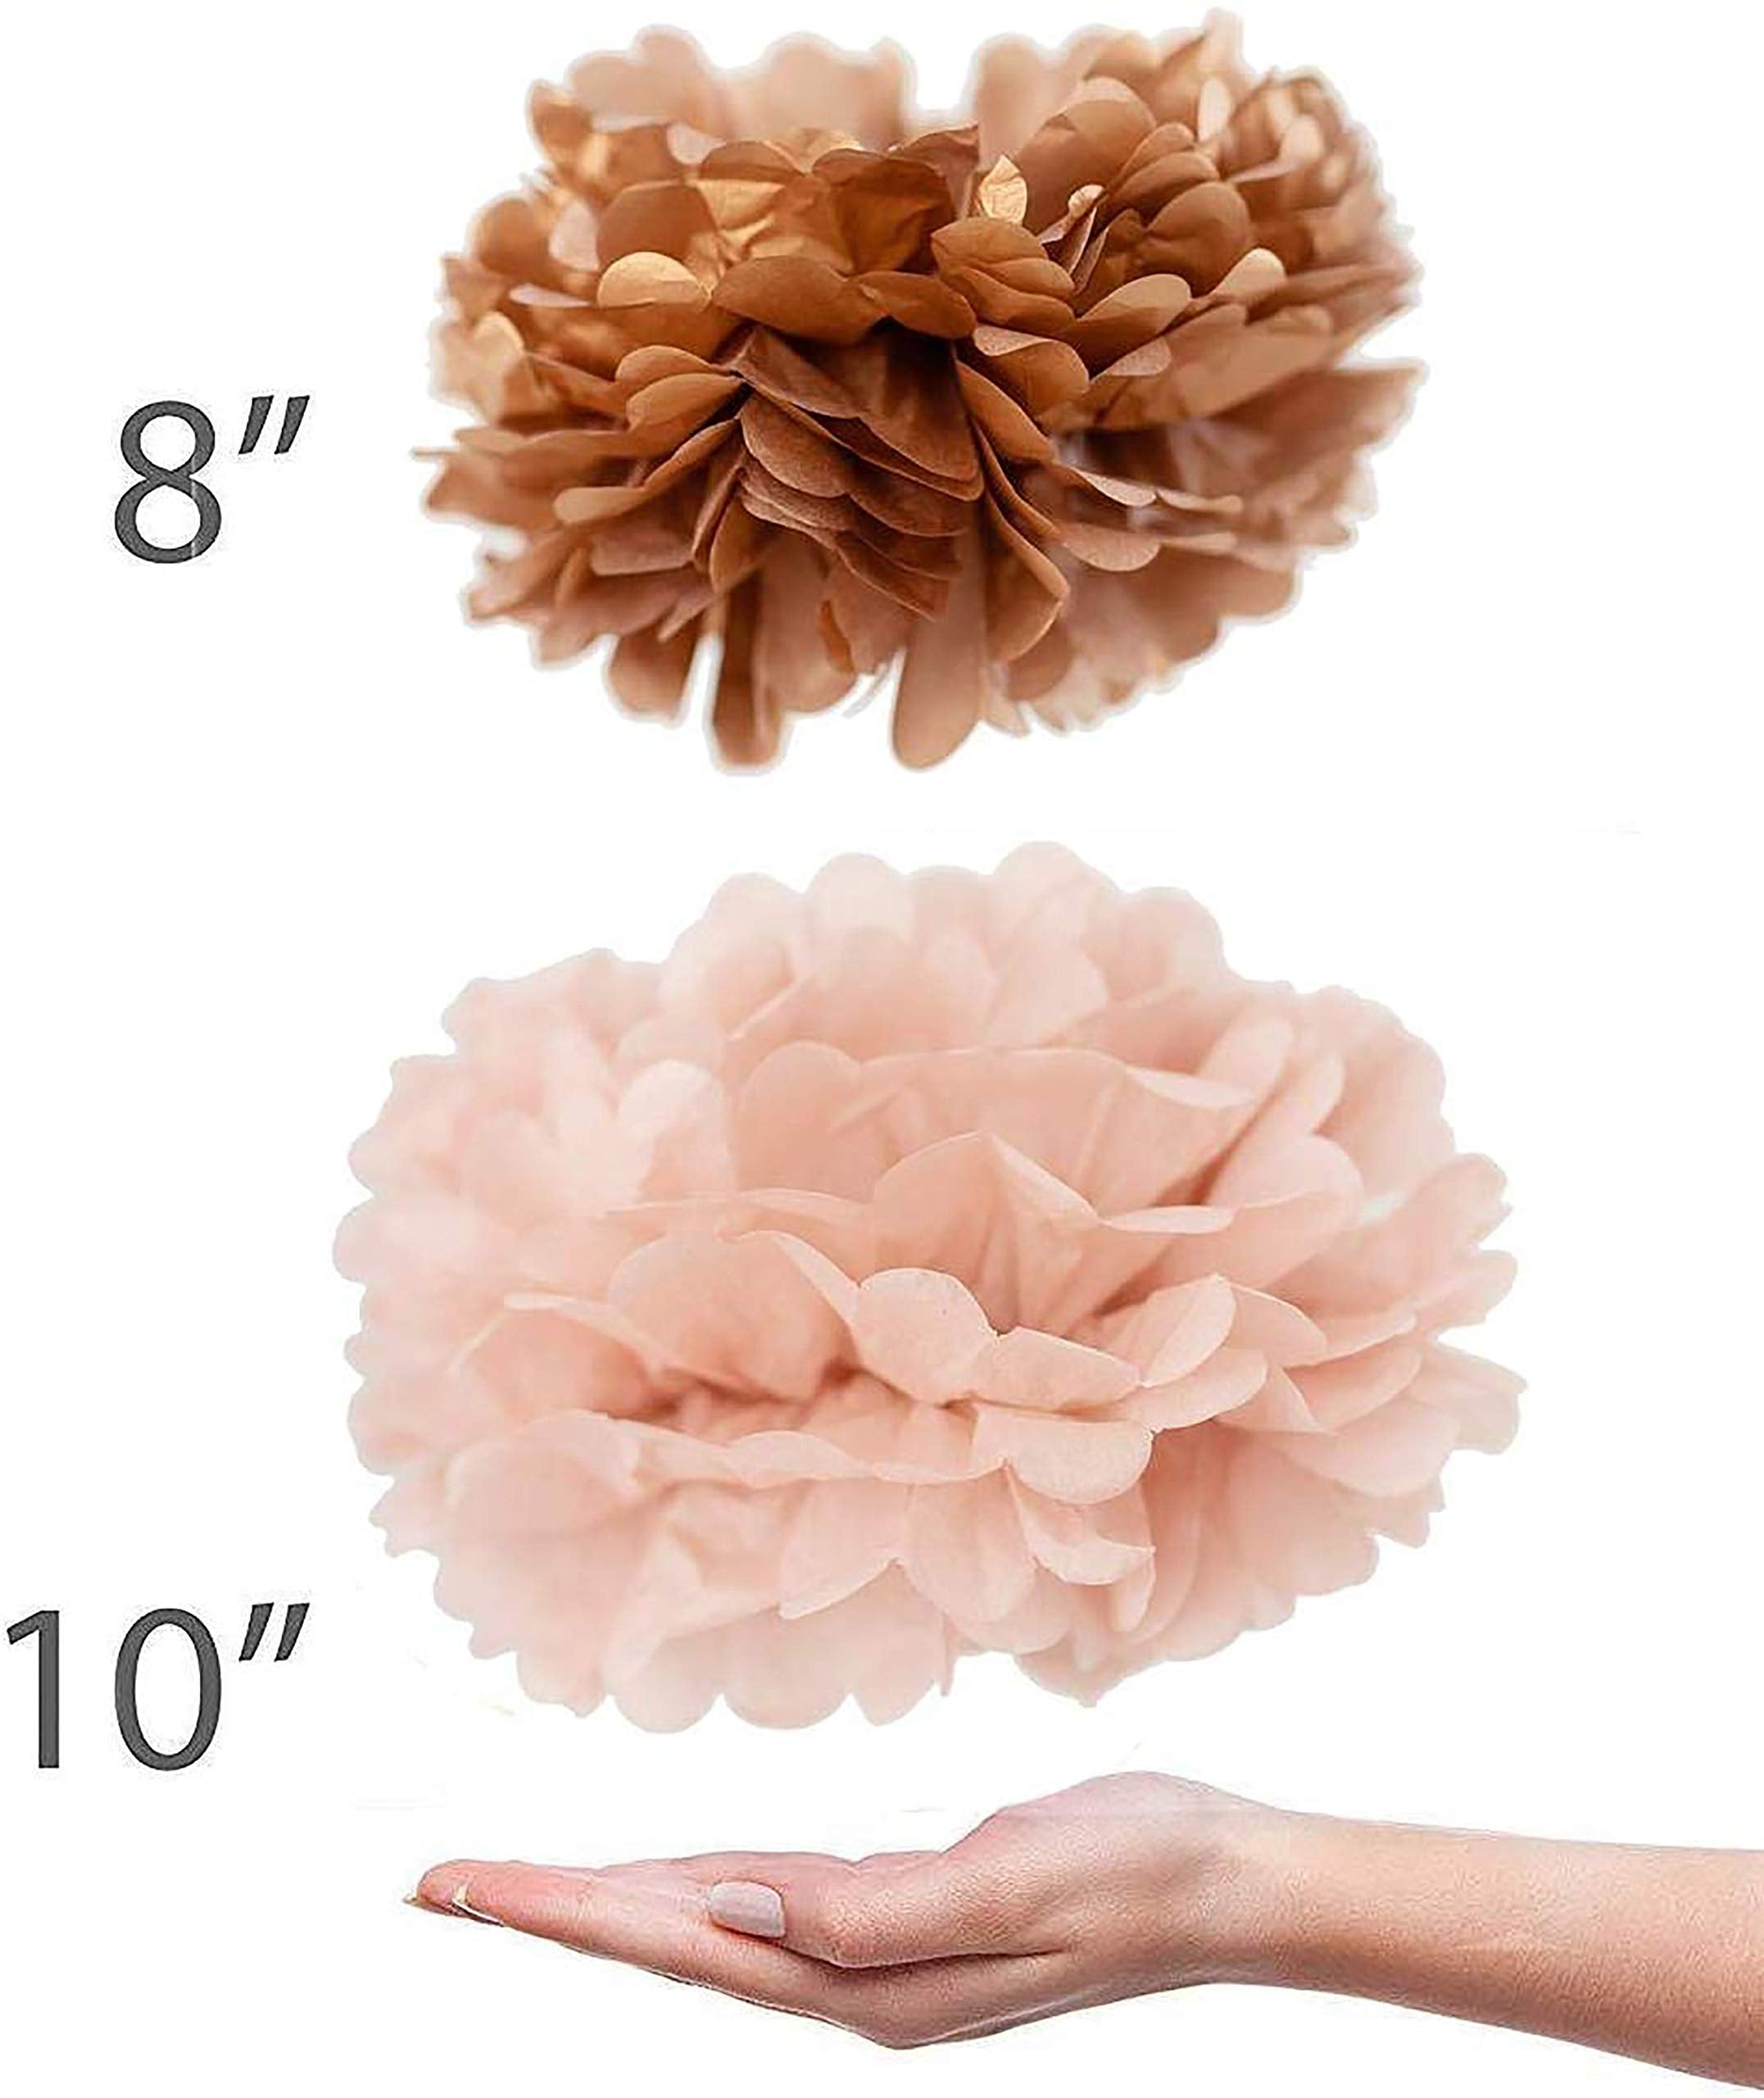 Flower Tissue Paper Kits (Pack of 6) Craft Kits